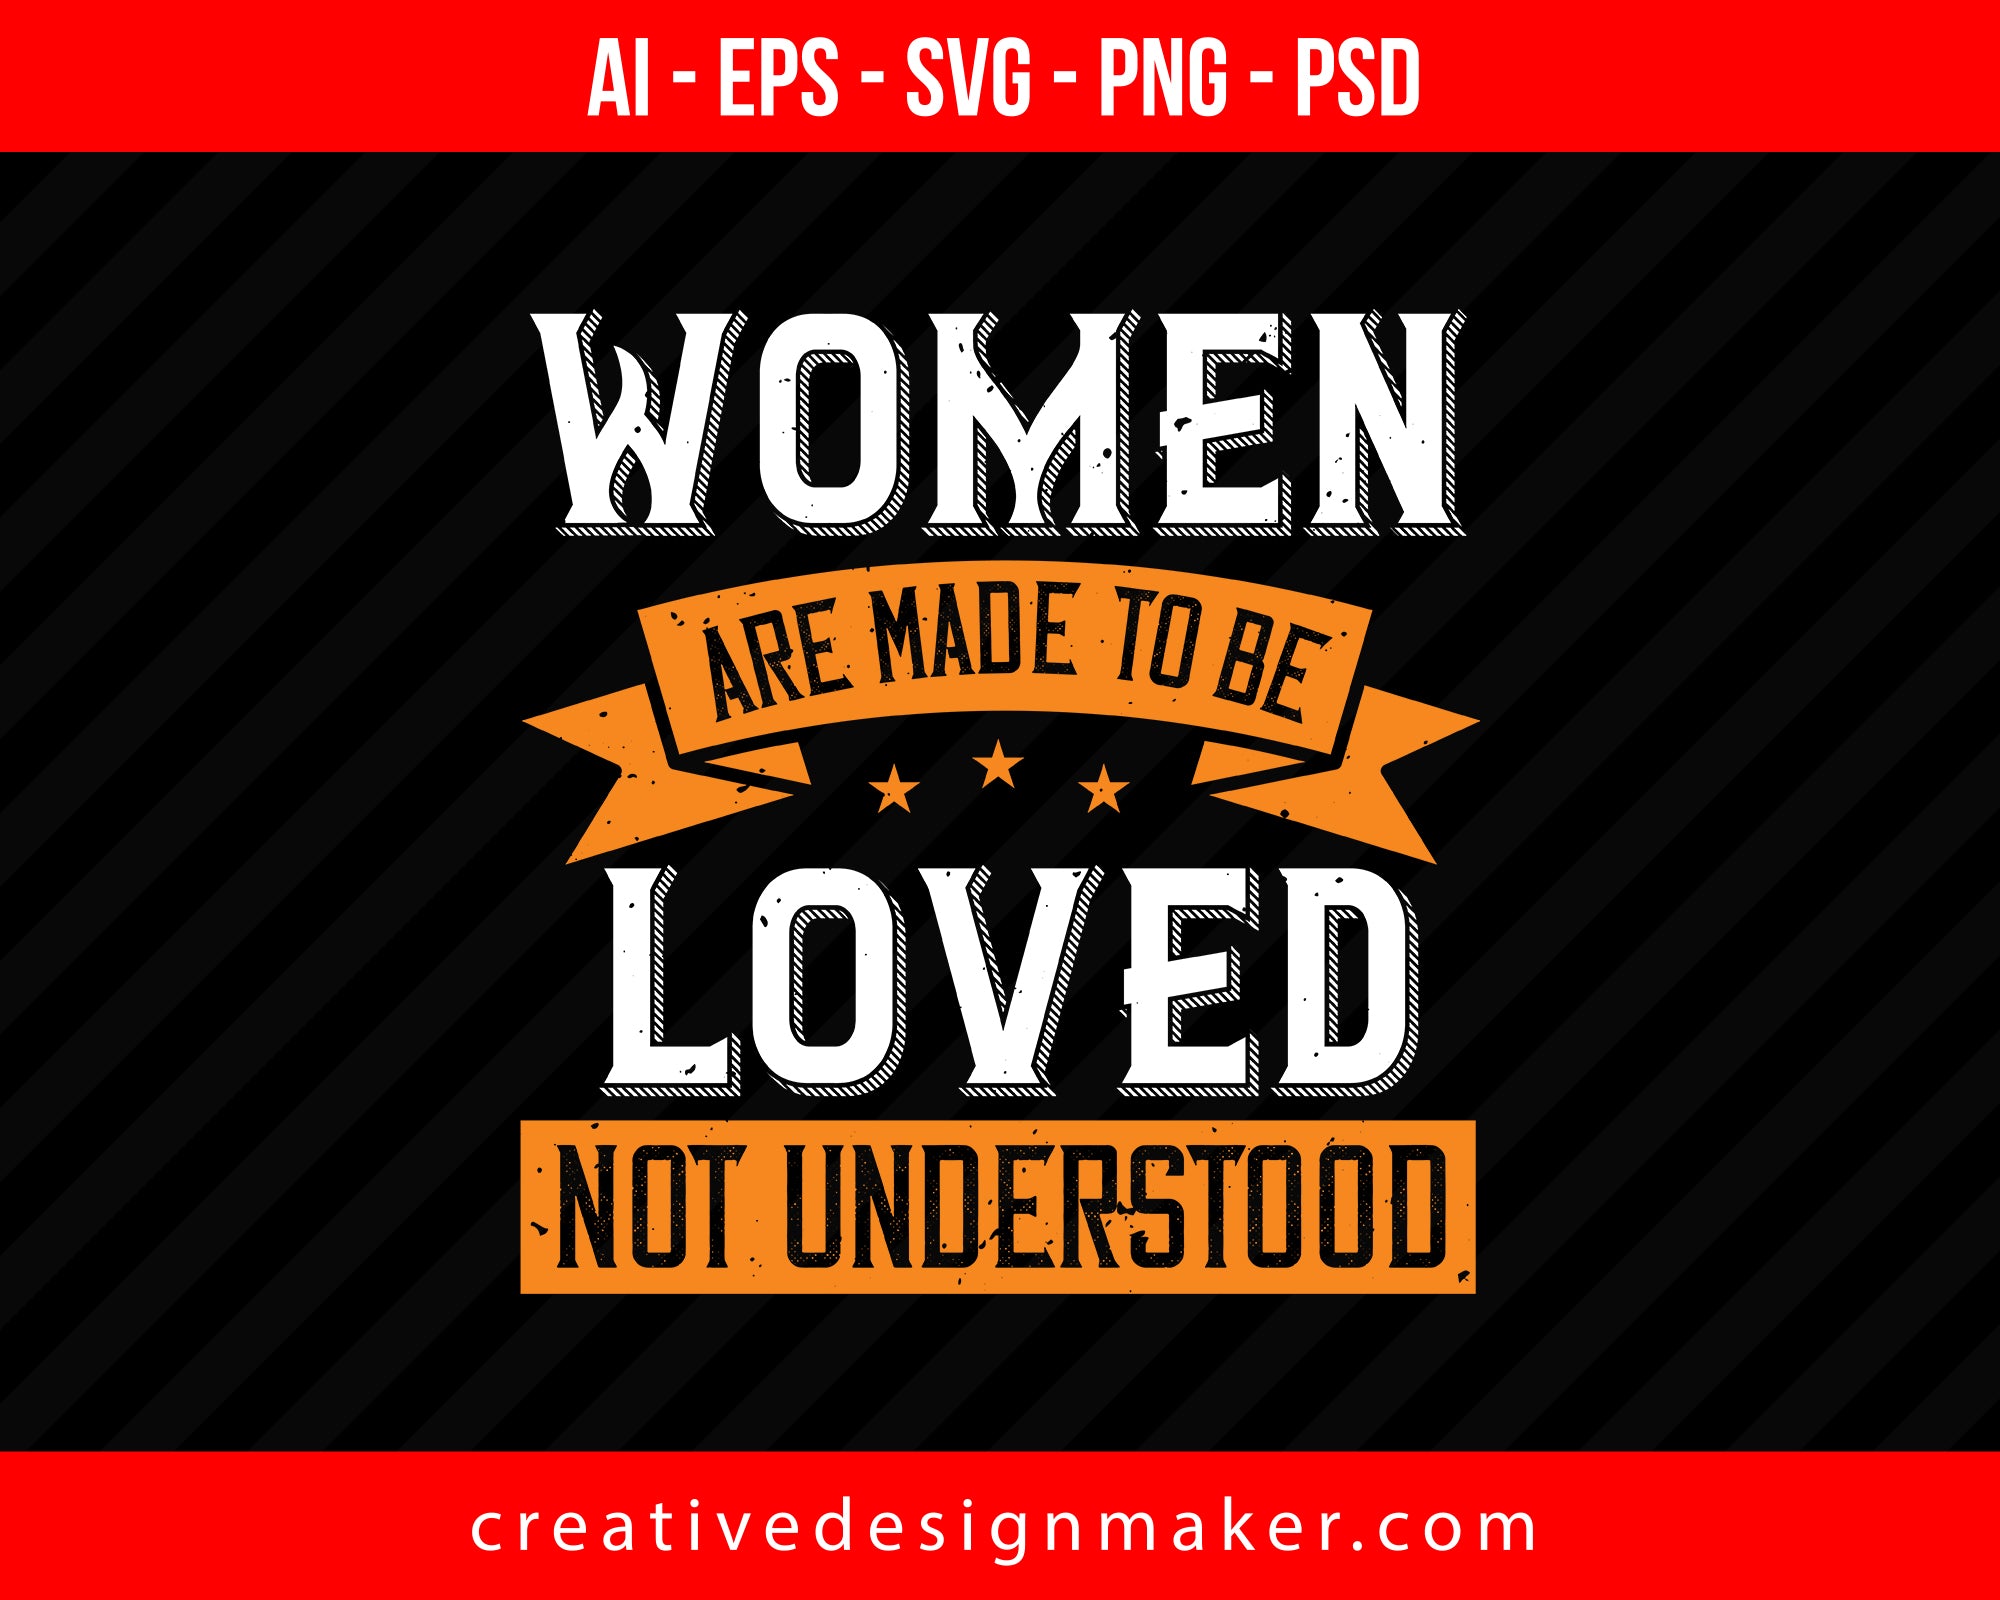 Women Are Made To Be Loved, Not Understood World Health Print Ready Editable T-Shirt SVG Design!